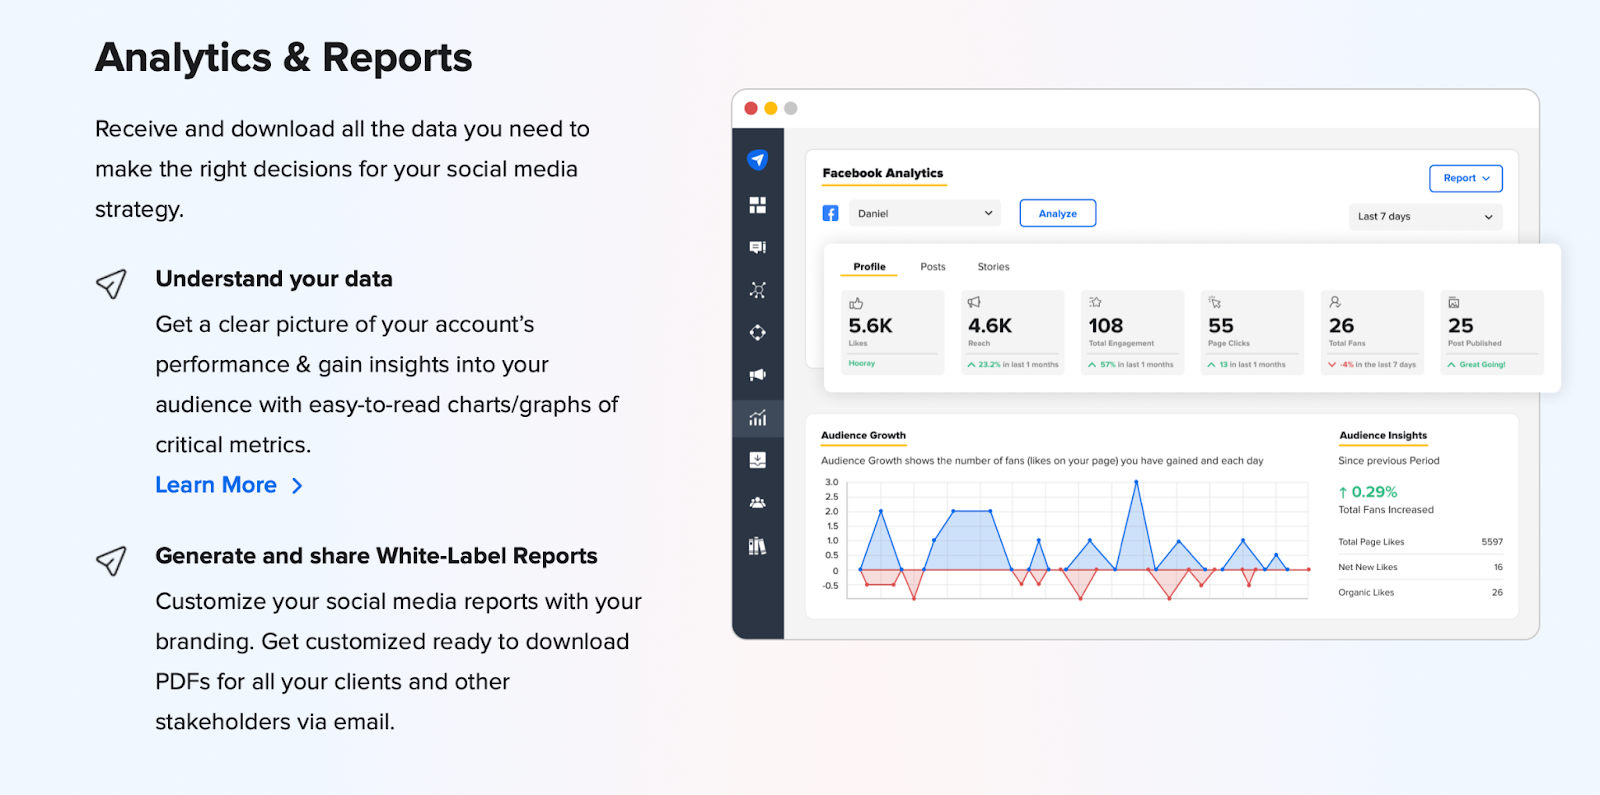 A screenshot of the "Analytics and Reports" section on SocialPilot's website. It illustrates how the platform works with an image of it. Then, it explains what you can use it for, such as "Understand your data" and "Generate and share White-Label Reports"